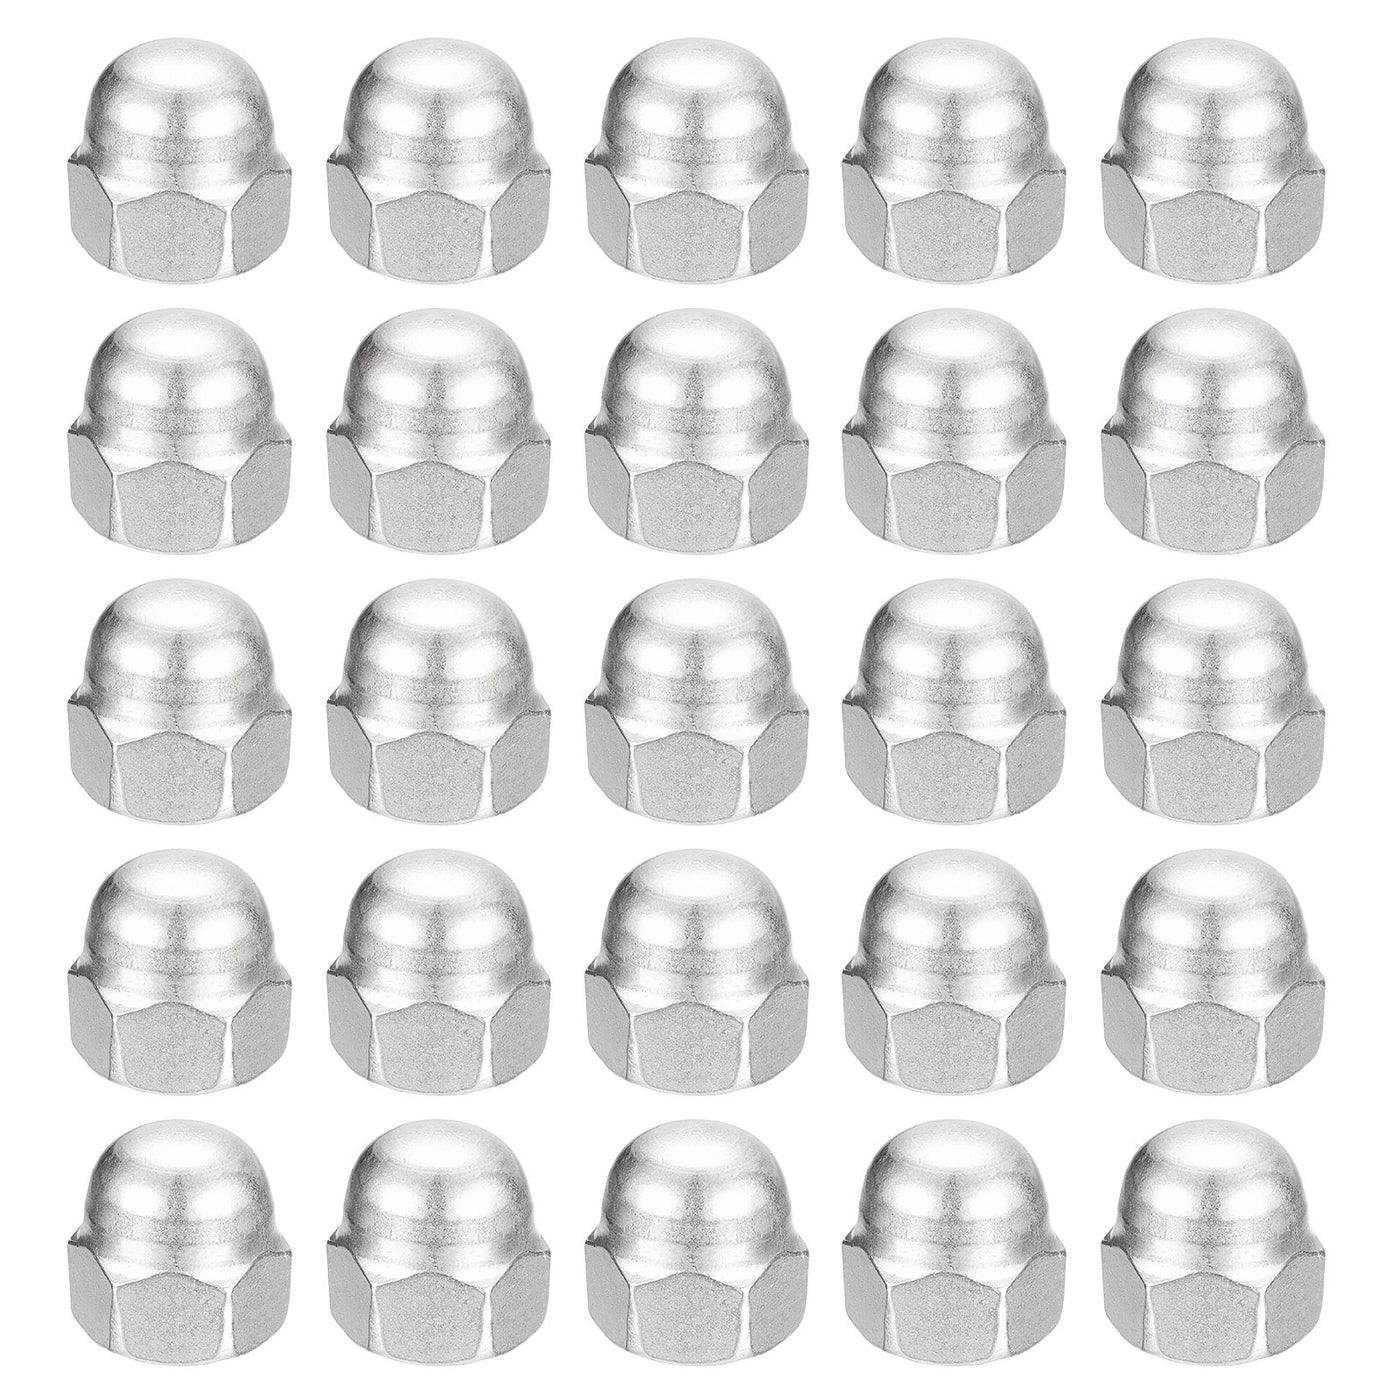 uxcell Uxcell 1/2-13 Acorn Cap Nuts,25pcs - 304 Stainless Steel Hardware Nuts, Acorn Hex Cap Dome Head Nuts for Fasteners (Silver)